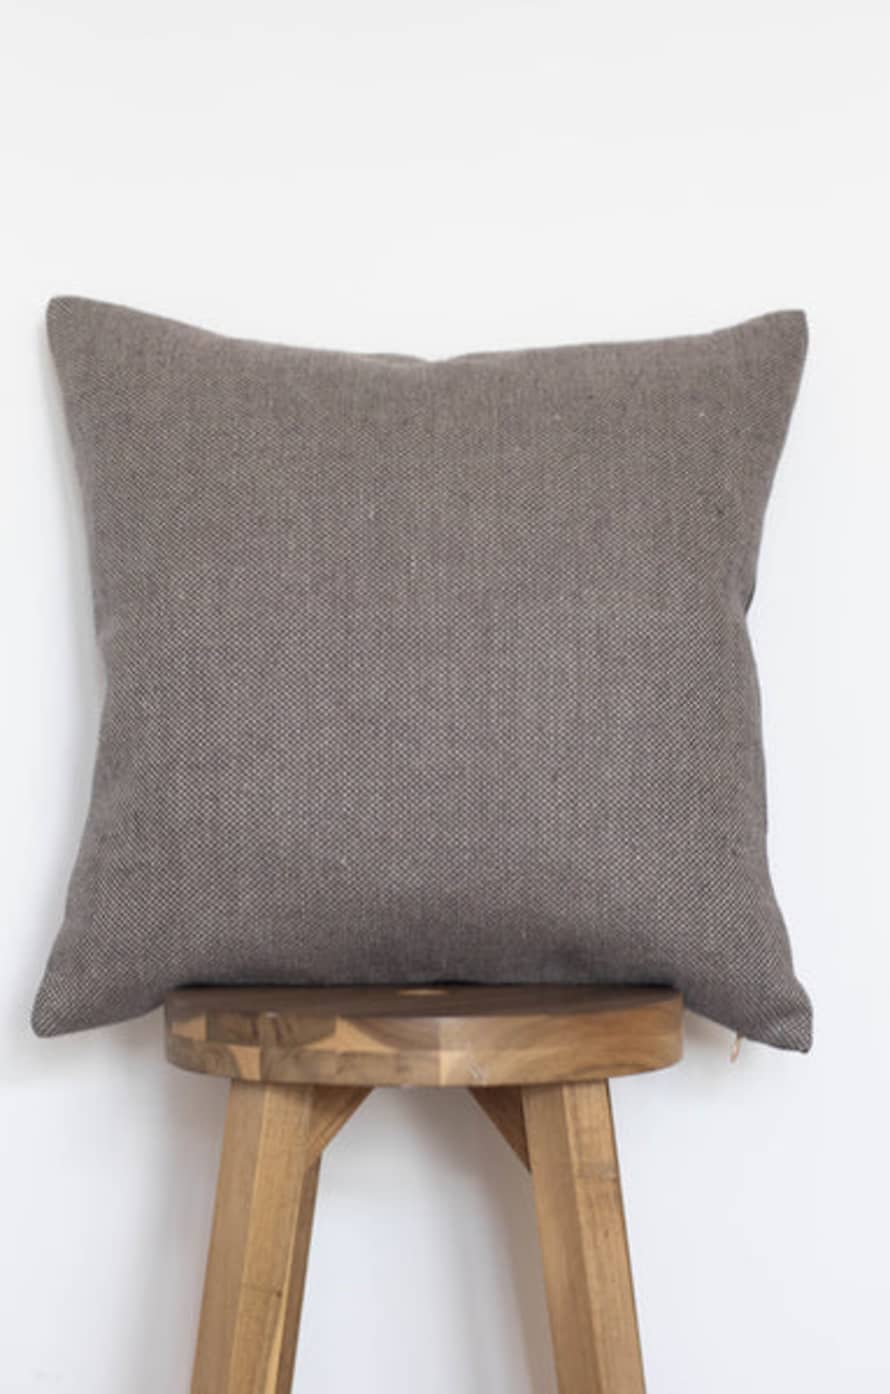 Ollie and Sab 45 X 45cm Kenmare Tweed Cushion With Filler